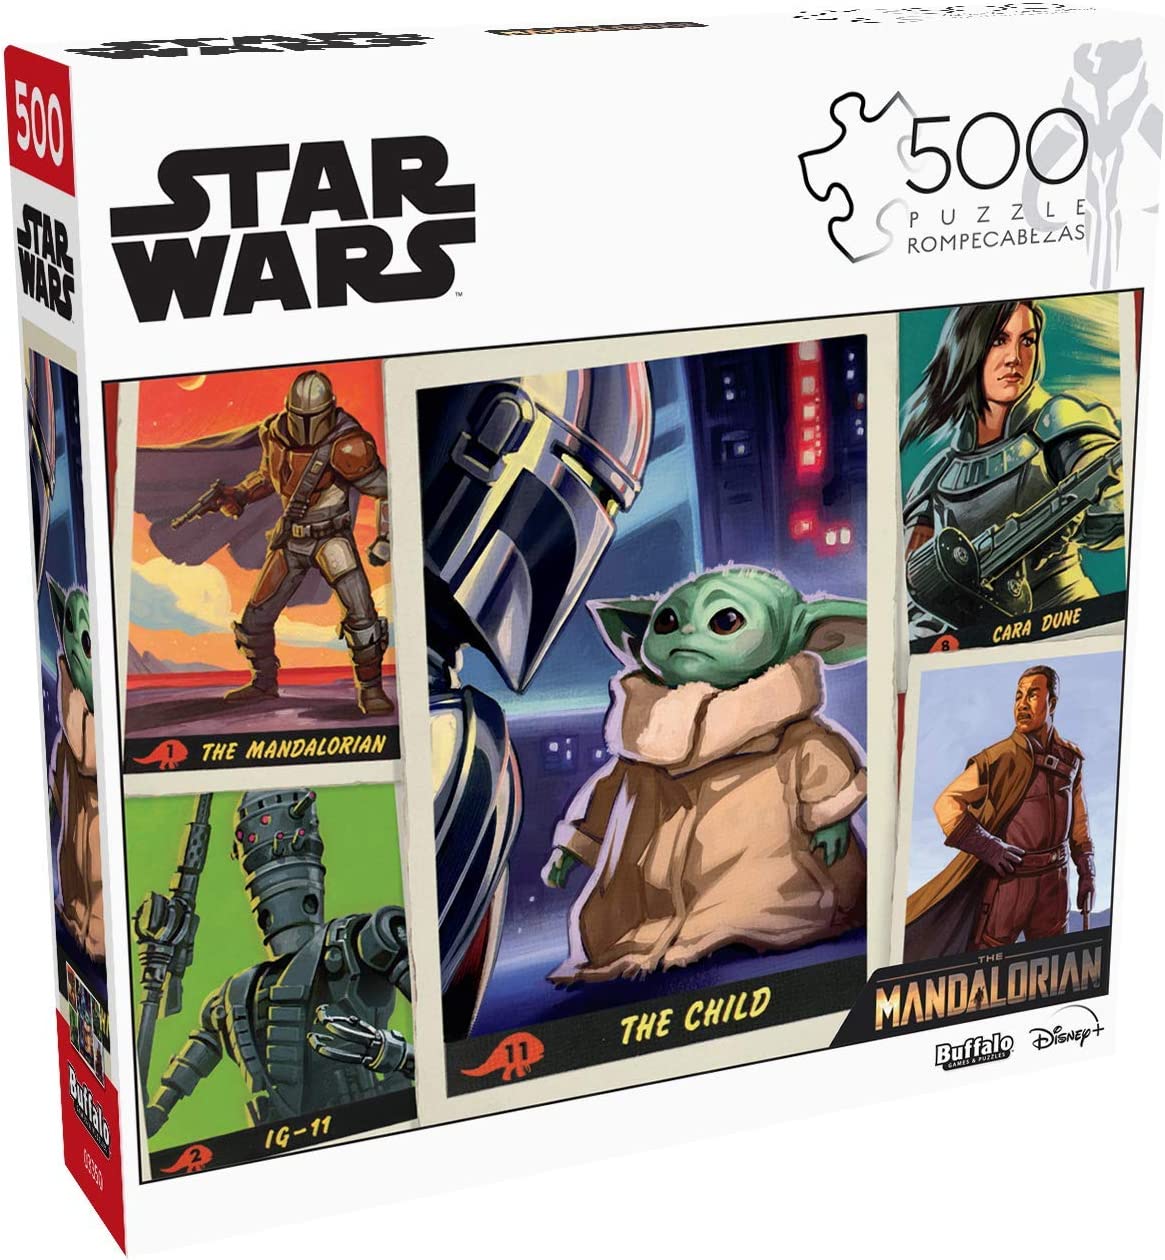 Star Wars The Mandalorian Jigsaw Puzzle The Child 500 pieces 